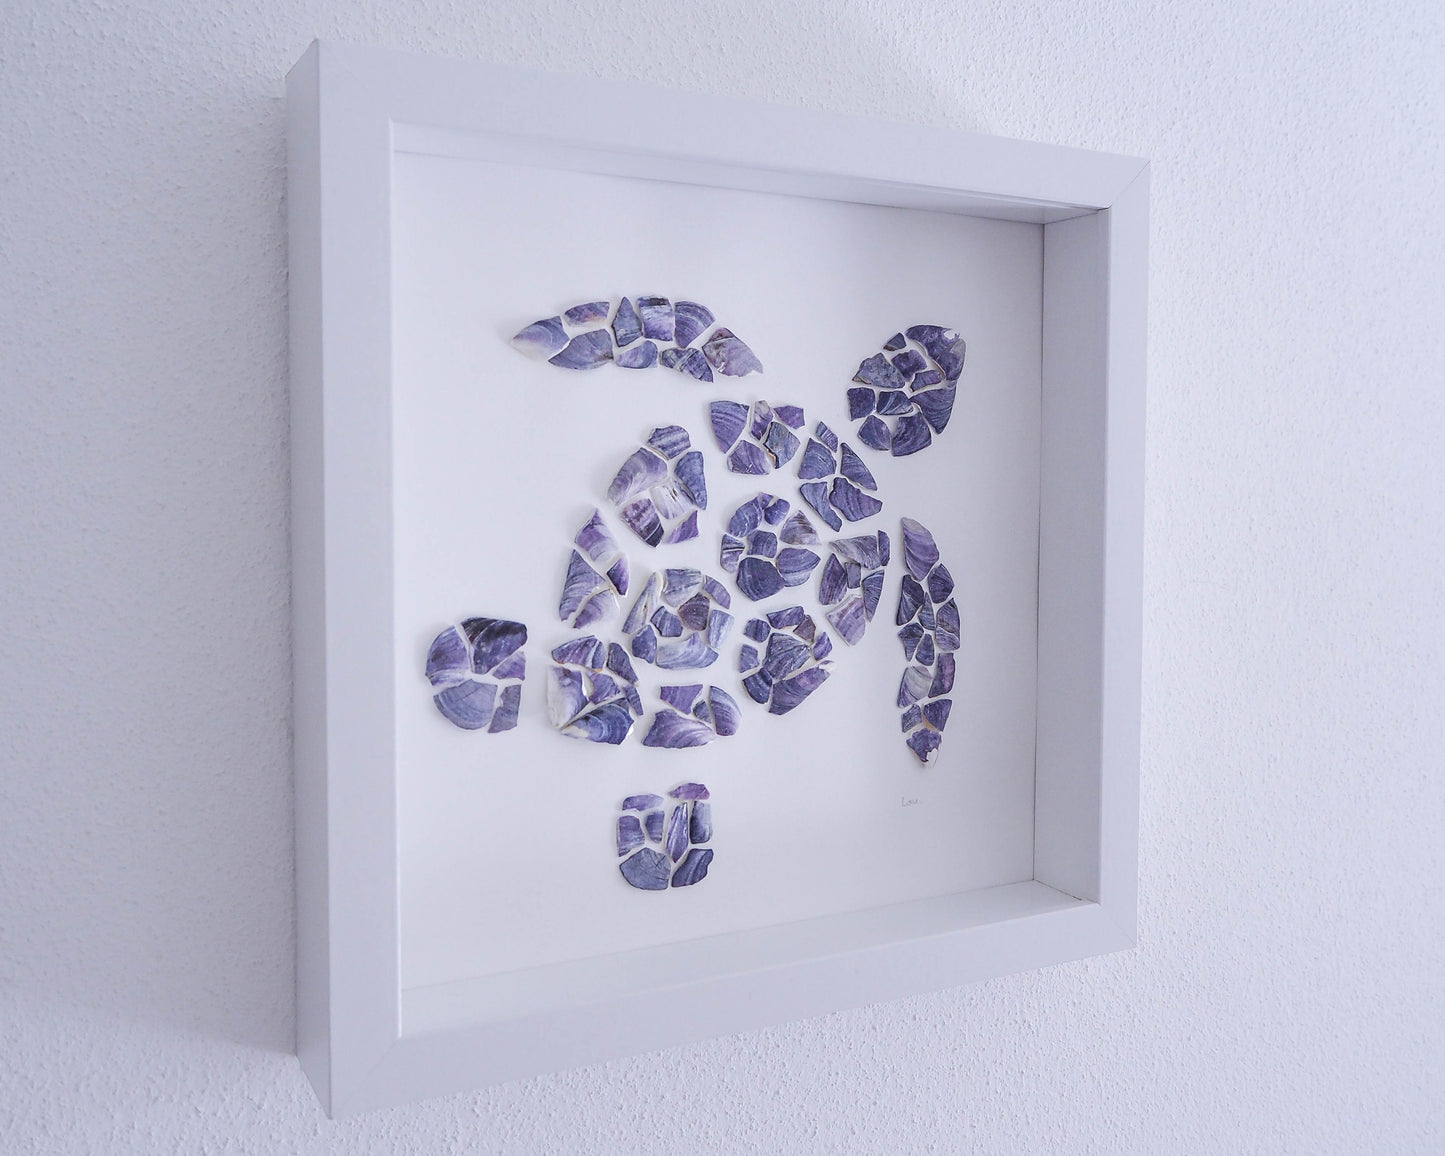 Ready-to-Hang Seashell Turtle Art: The front of the Seashell Turtle Art, featuring the attached hanger for convenient display. Hanging Shell Art, Coastal Wall Decor, Sea by Lou